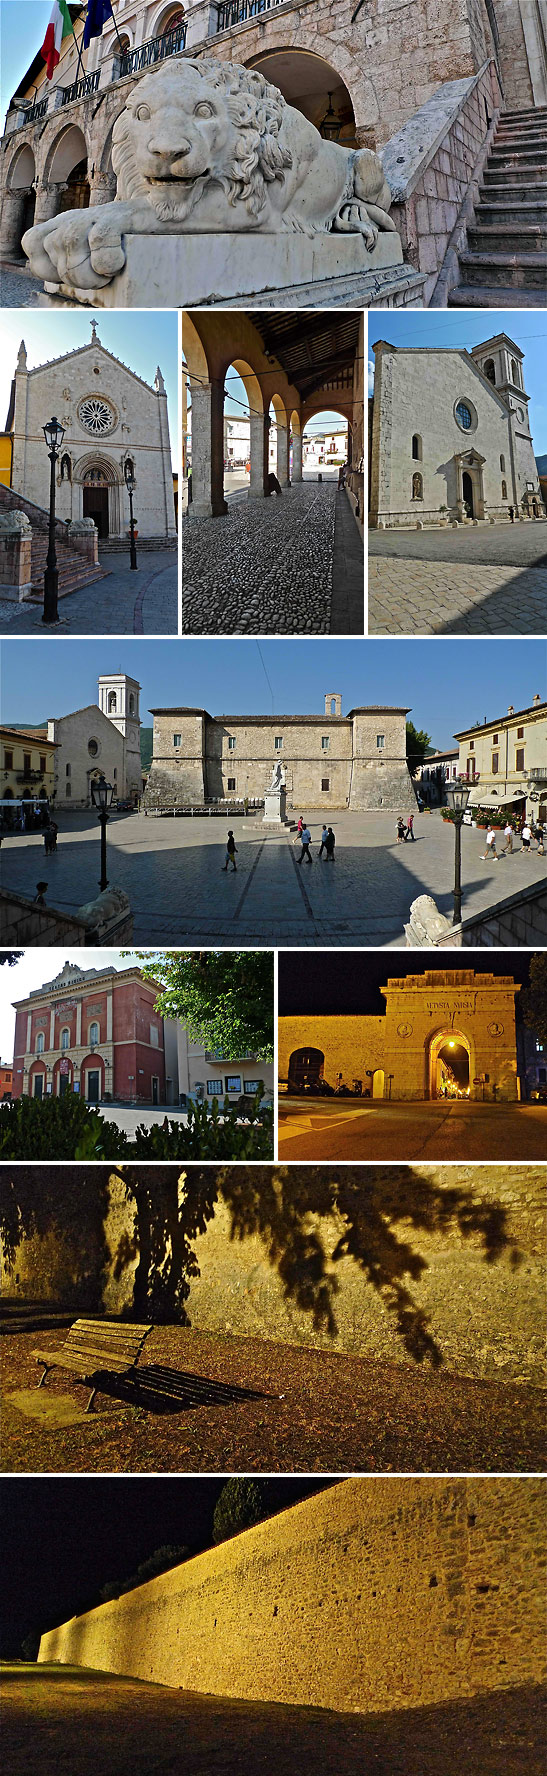 buildings in Norcia's circular main square of Piazza San Benedetto